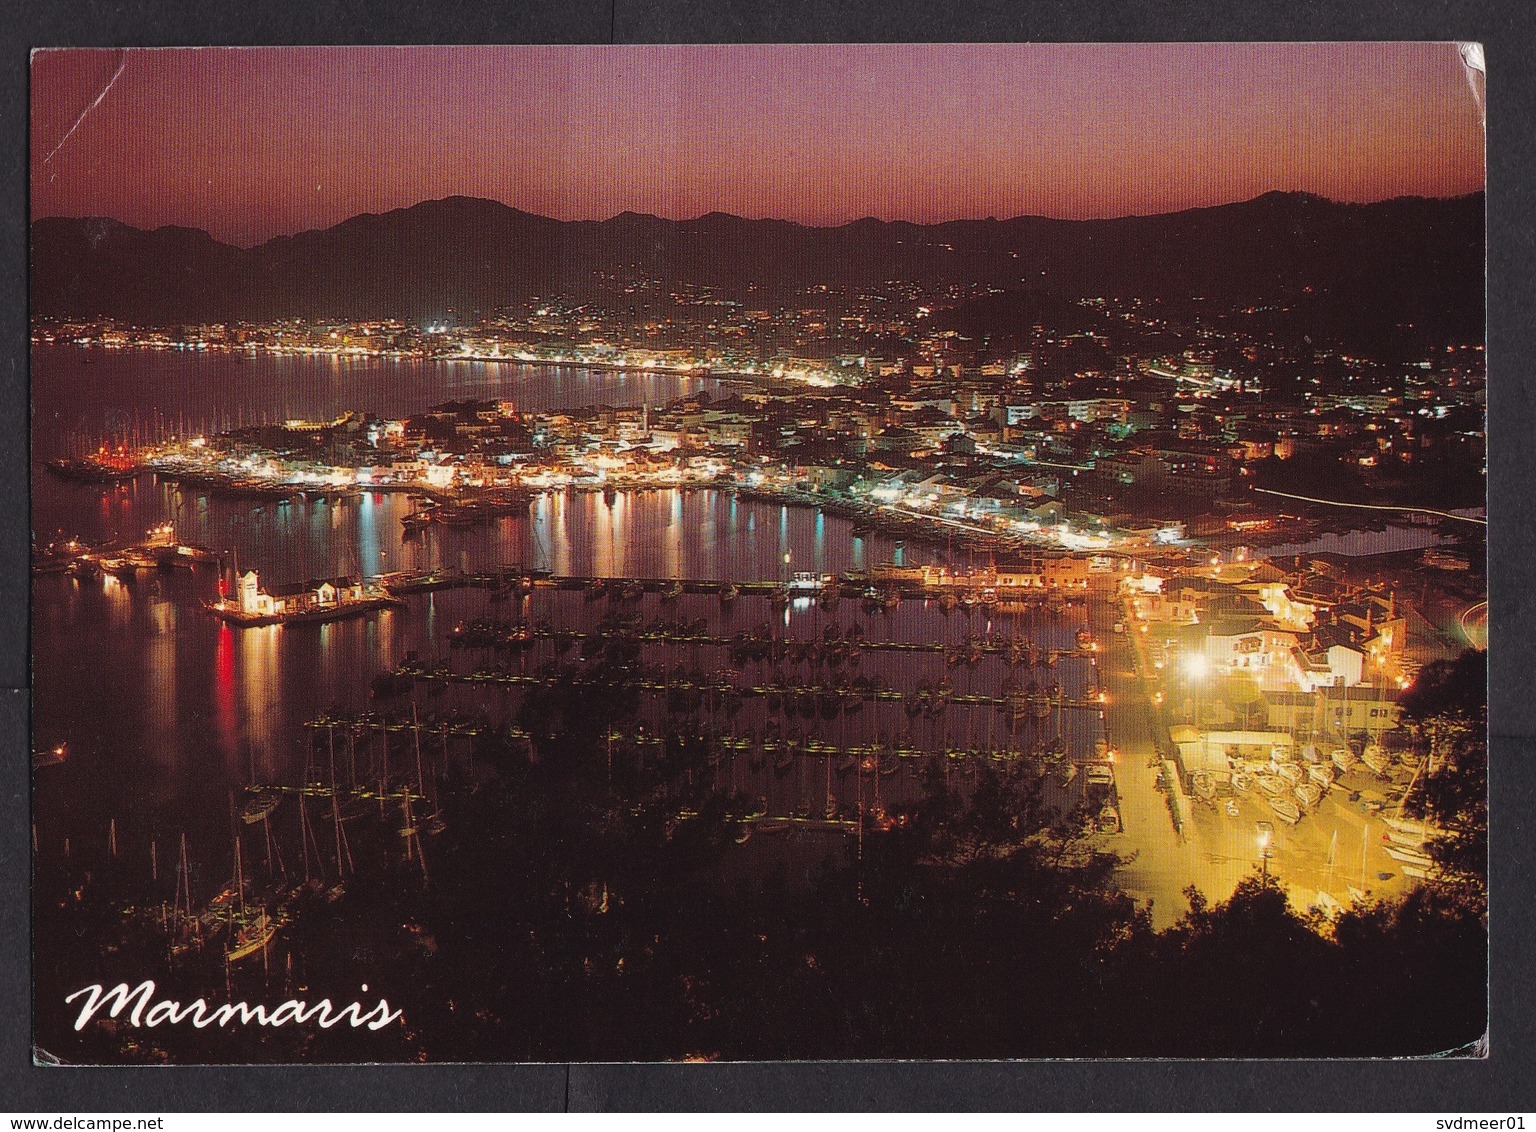 Turkey: Picture Postcard Marmaris To Netherlands, 1990s, 2 Stamps, Bird, City View, Inflation: 225,000.- (minor Damage) - Lettres & Documents